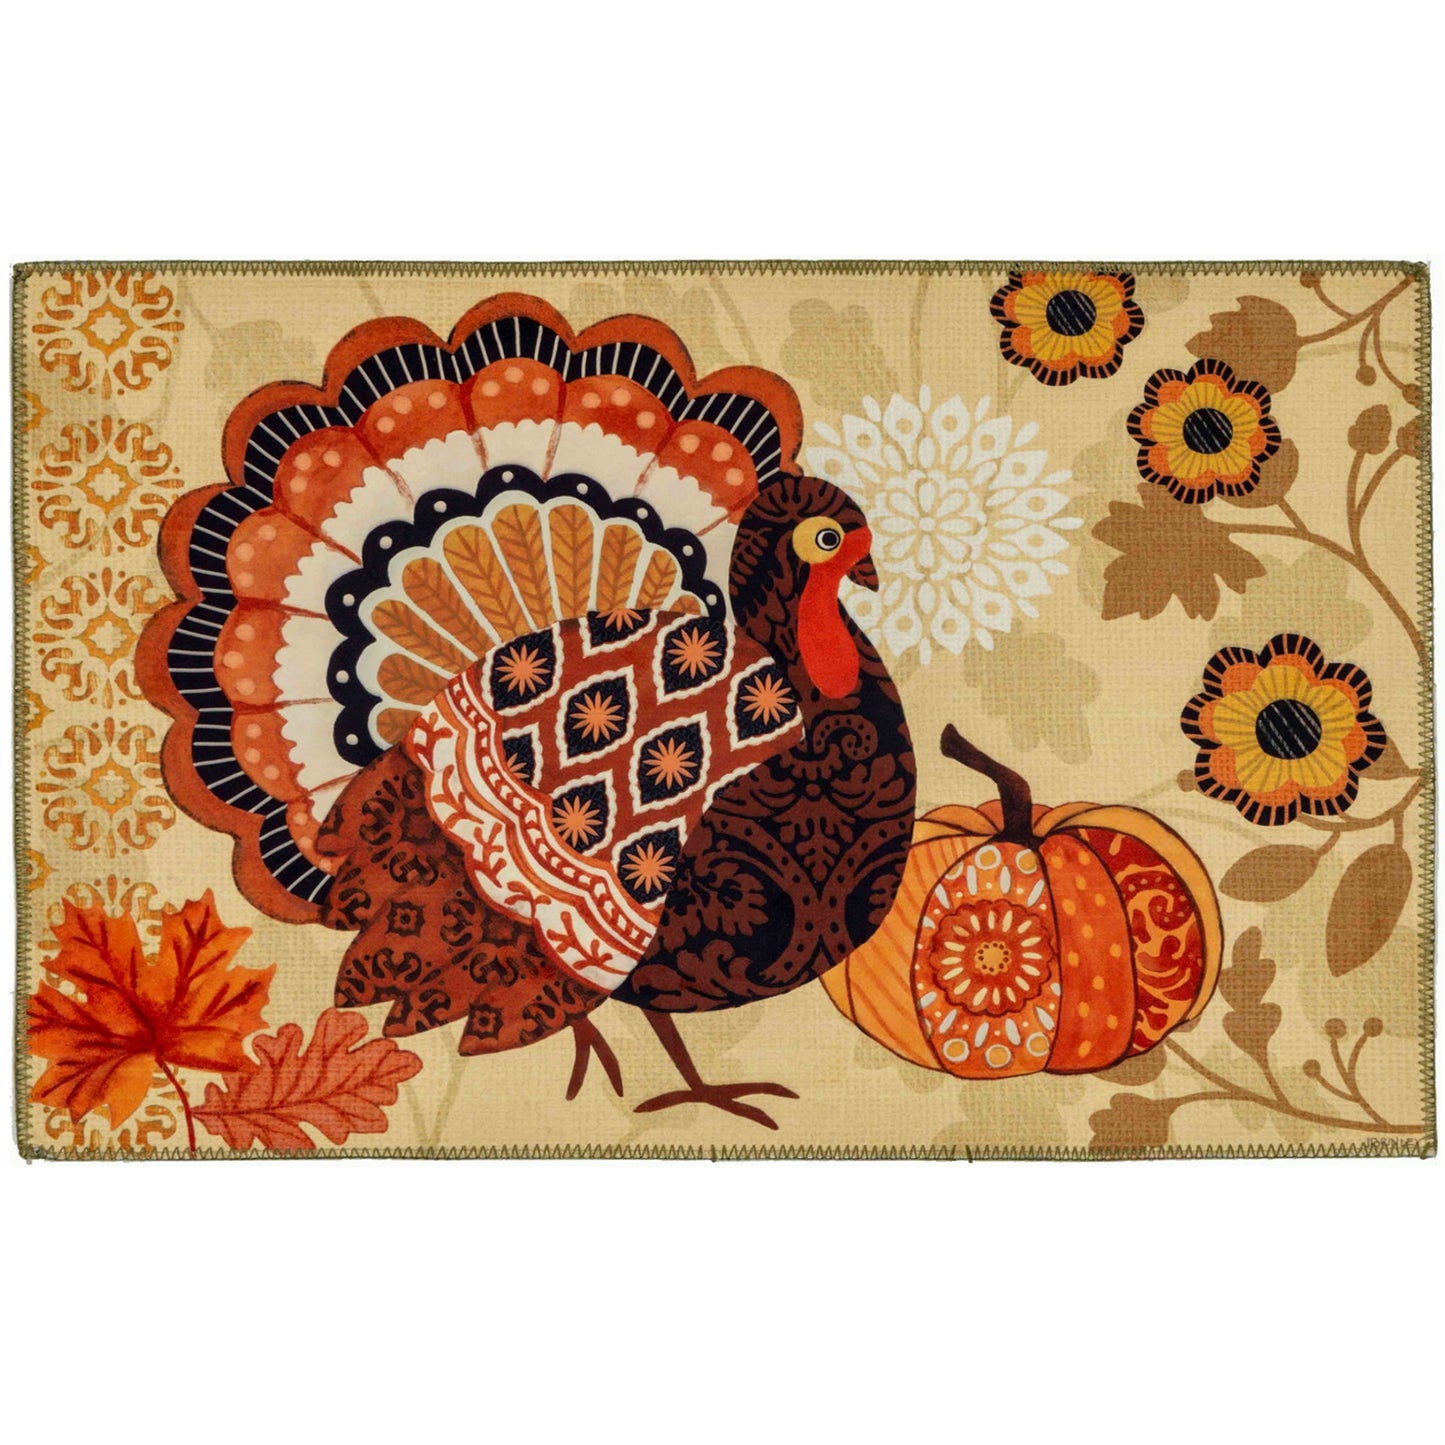 Rustic Turkey Olivia's Home Accent Rug Thanksgiving Themed Rug 22" x 32"